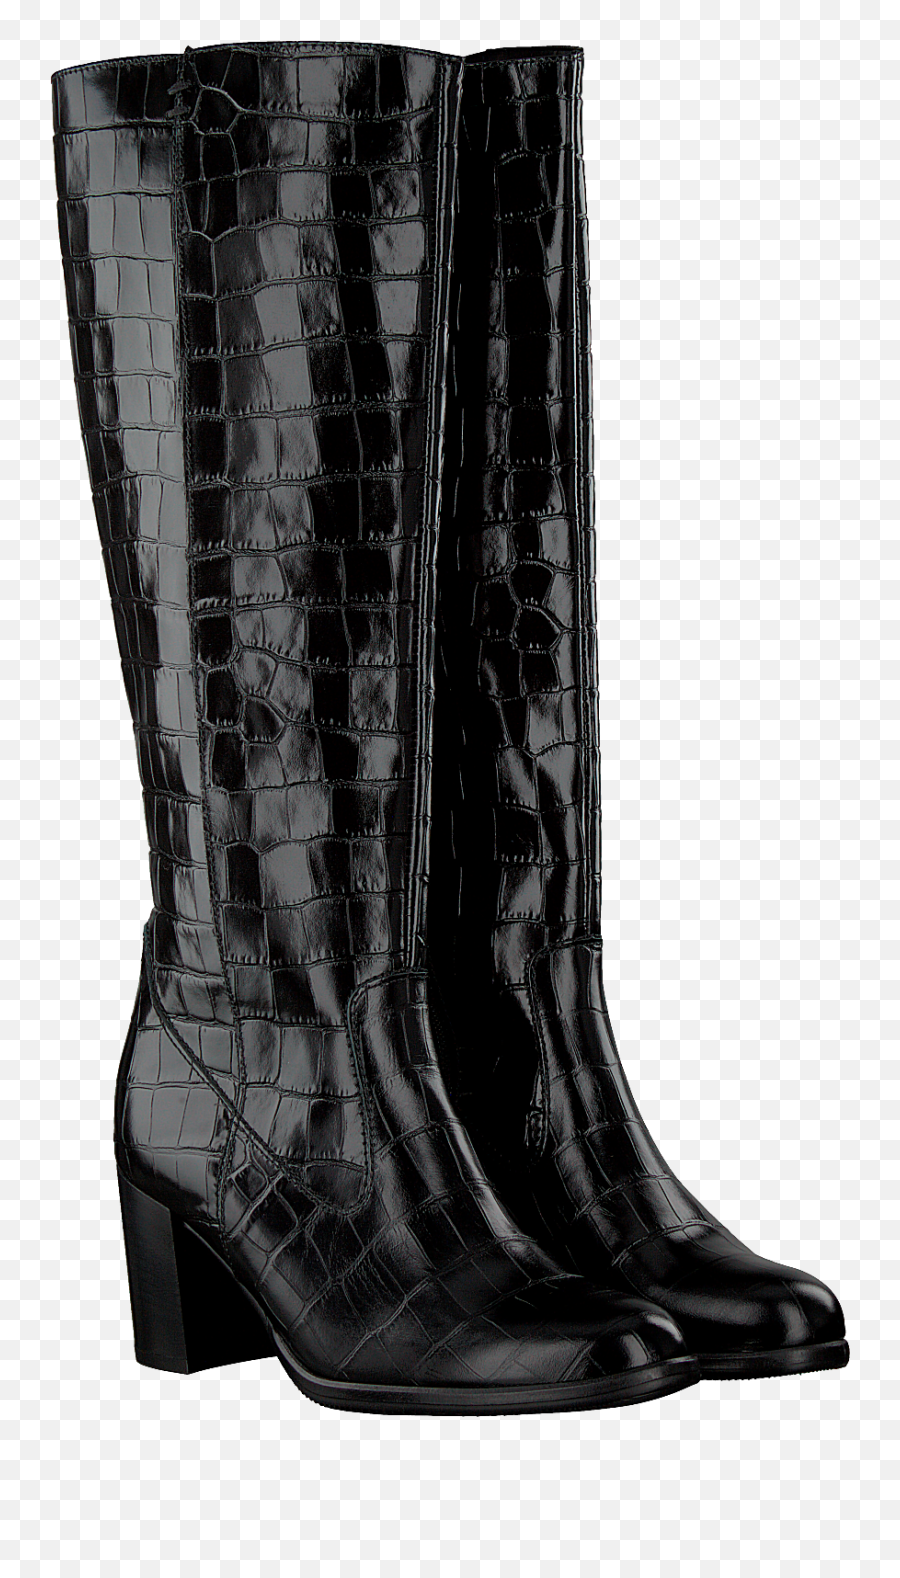 Gabor Crocodile Boots Cheap Online - Round Toe Emoji,Steve Madden Over The Knee Boots Emotions